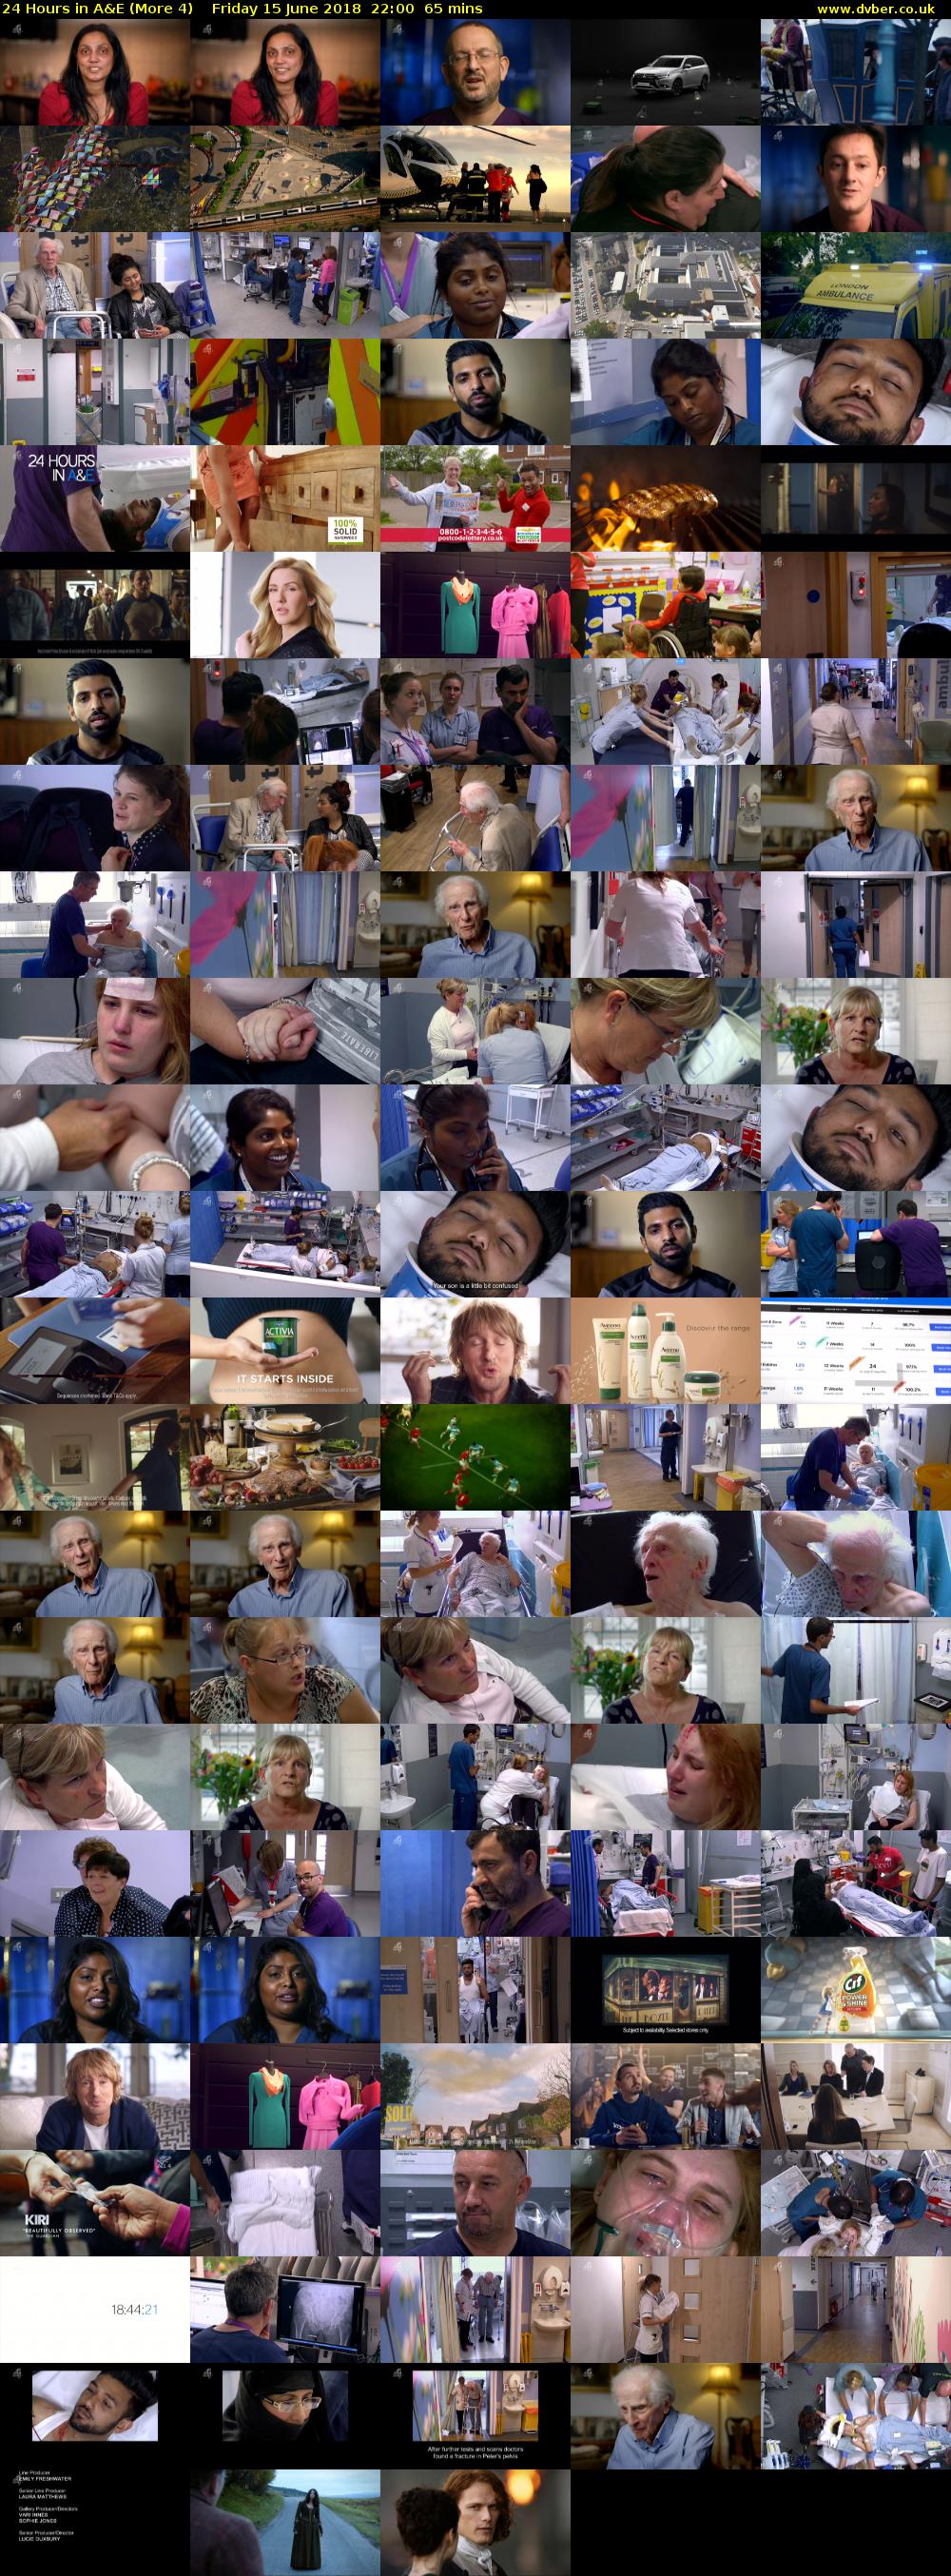 24 Hours in A&E (More 4) Friday 15 June 2018 22:00 - 23:05